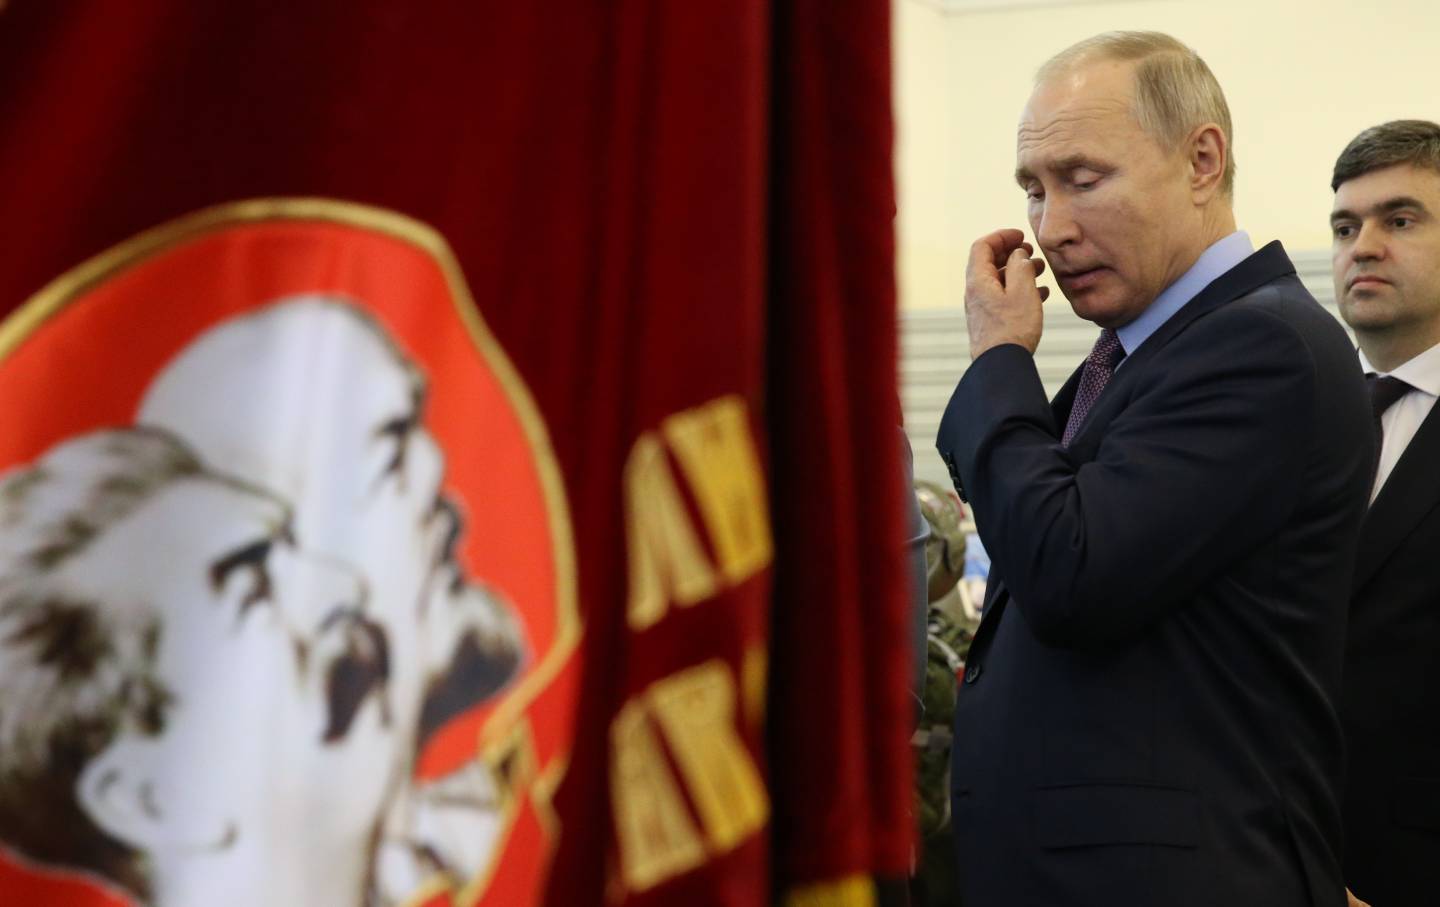 Russian President Vladimir Putin looks on the flag with portraits of Soviet leaders Vladimir Lenin and Joseph Stalin while visiting the Parachute factory in Ivanovo, Russia on March 6, 2020.